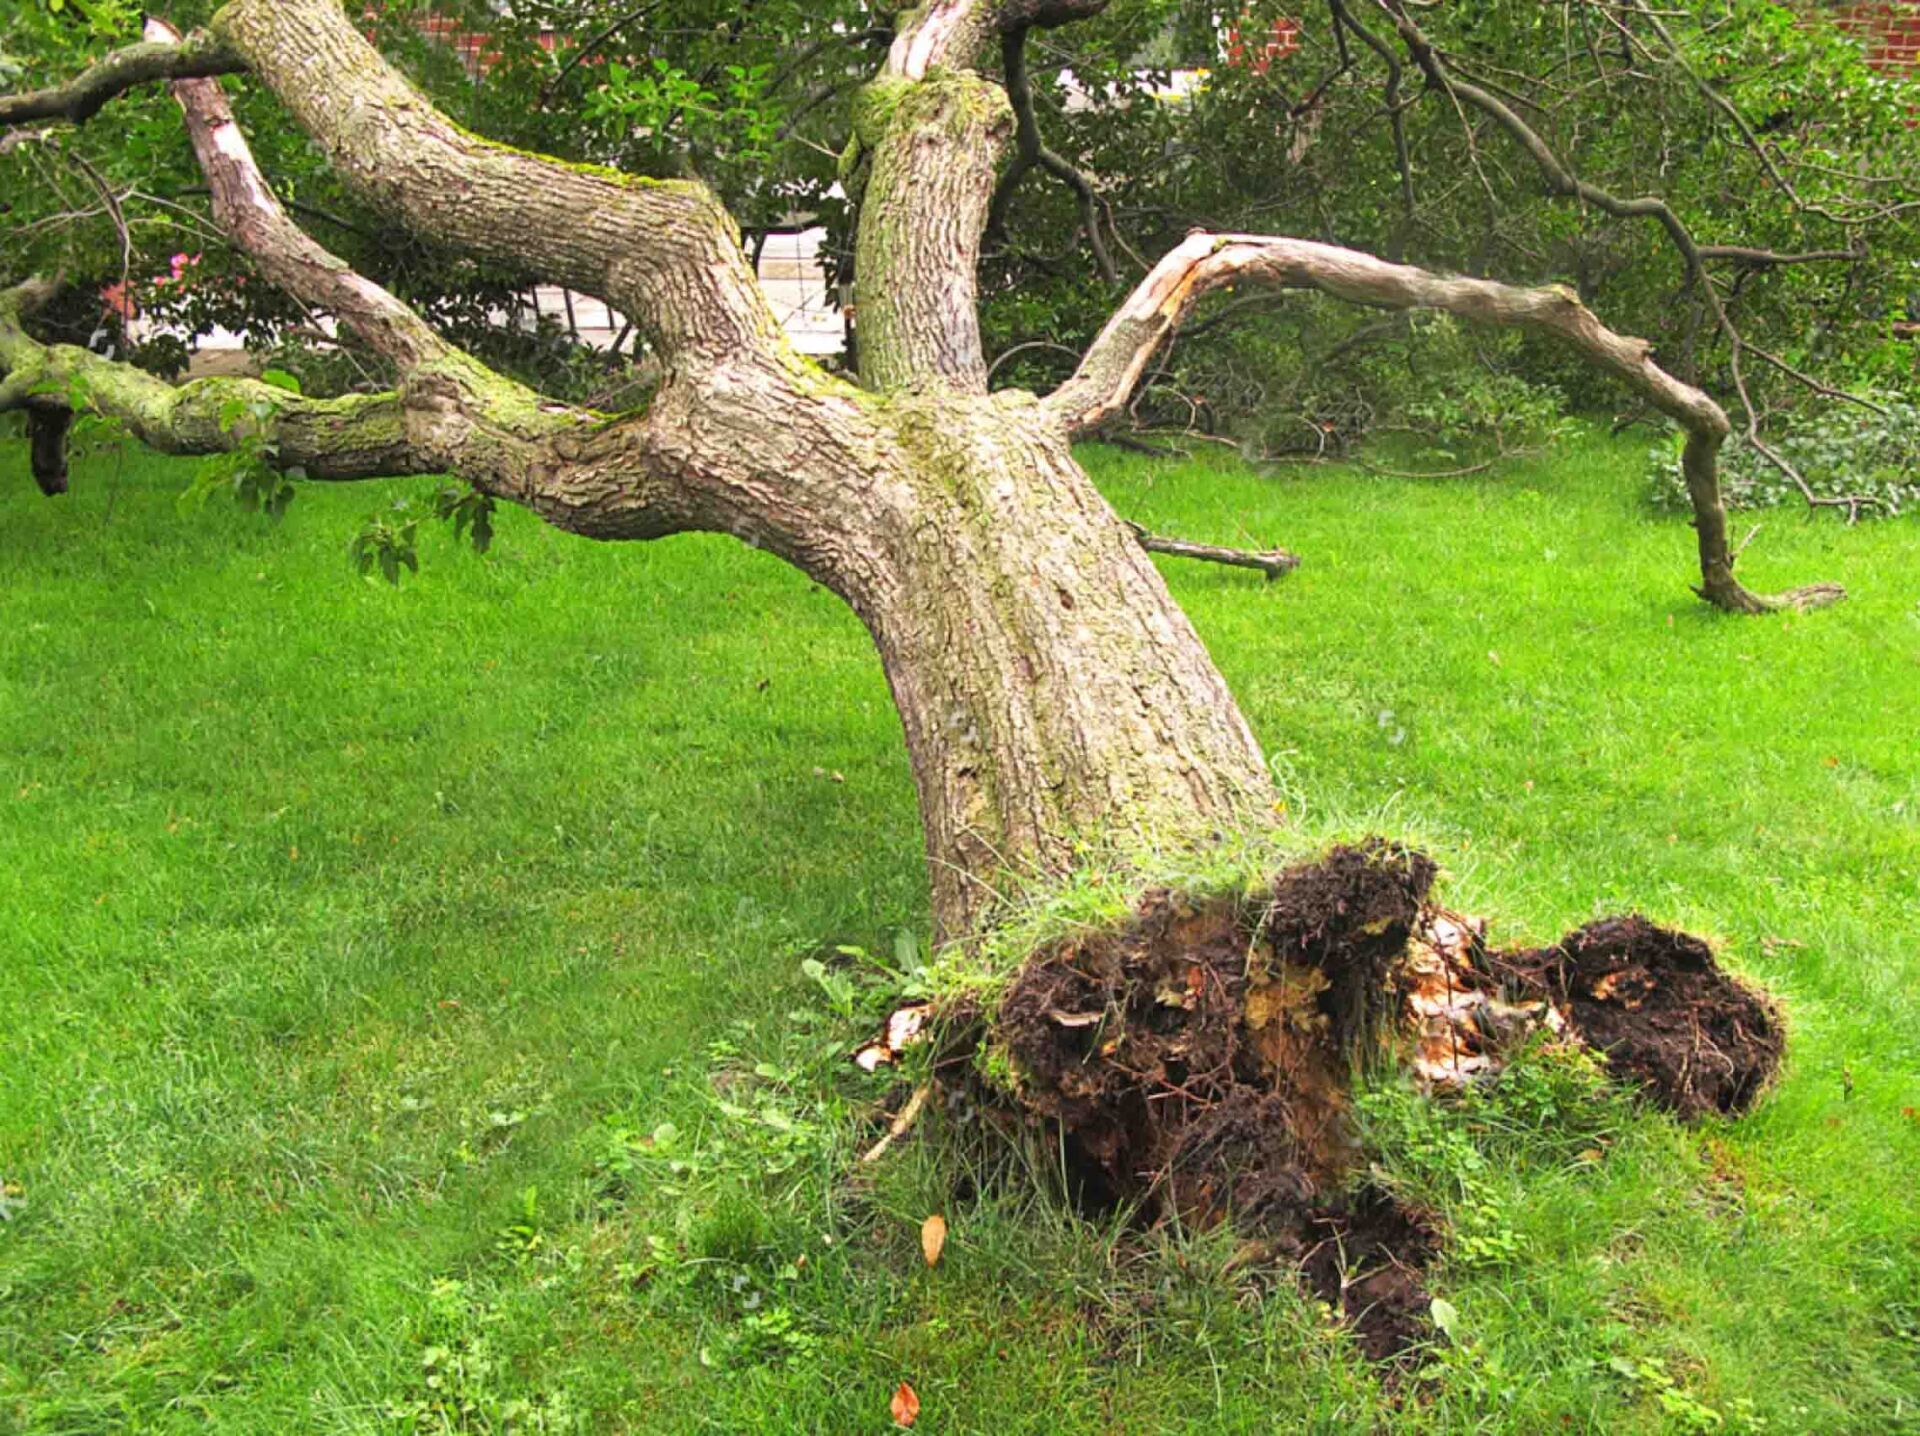 A strong fallen tree in the middle of a landscape with roots exposed.  The long thick branches are supporting its weight as it lies slightly suspended.